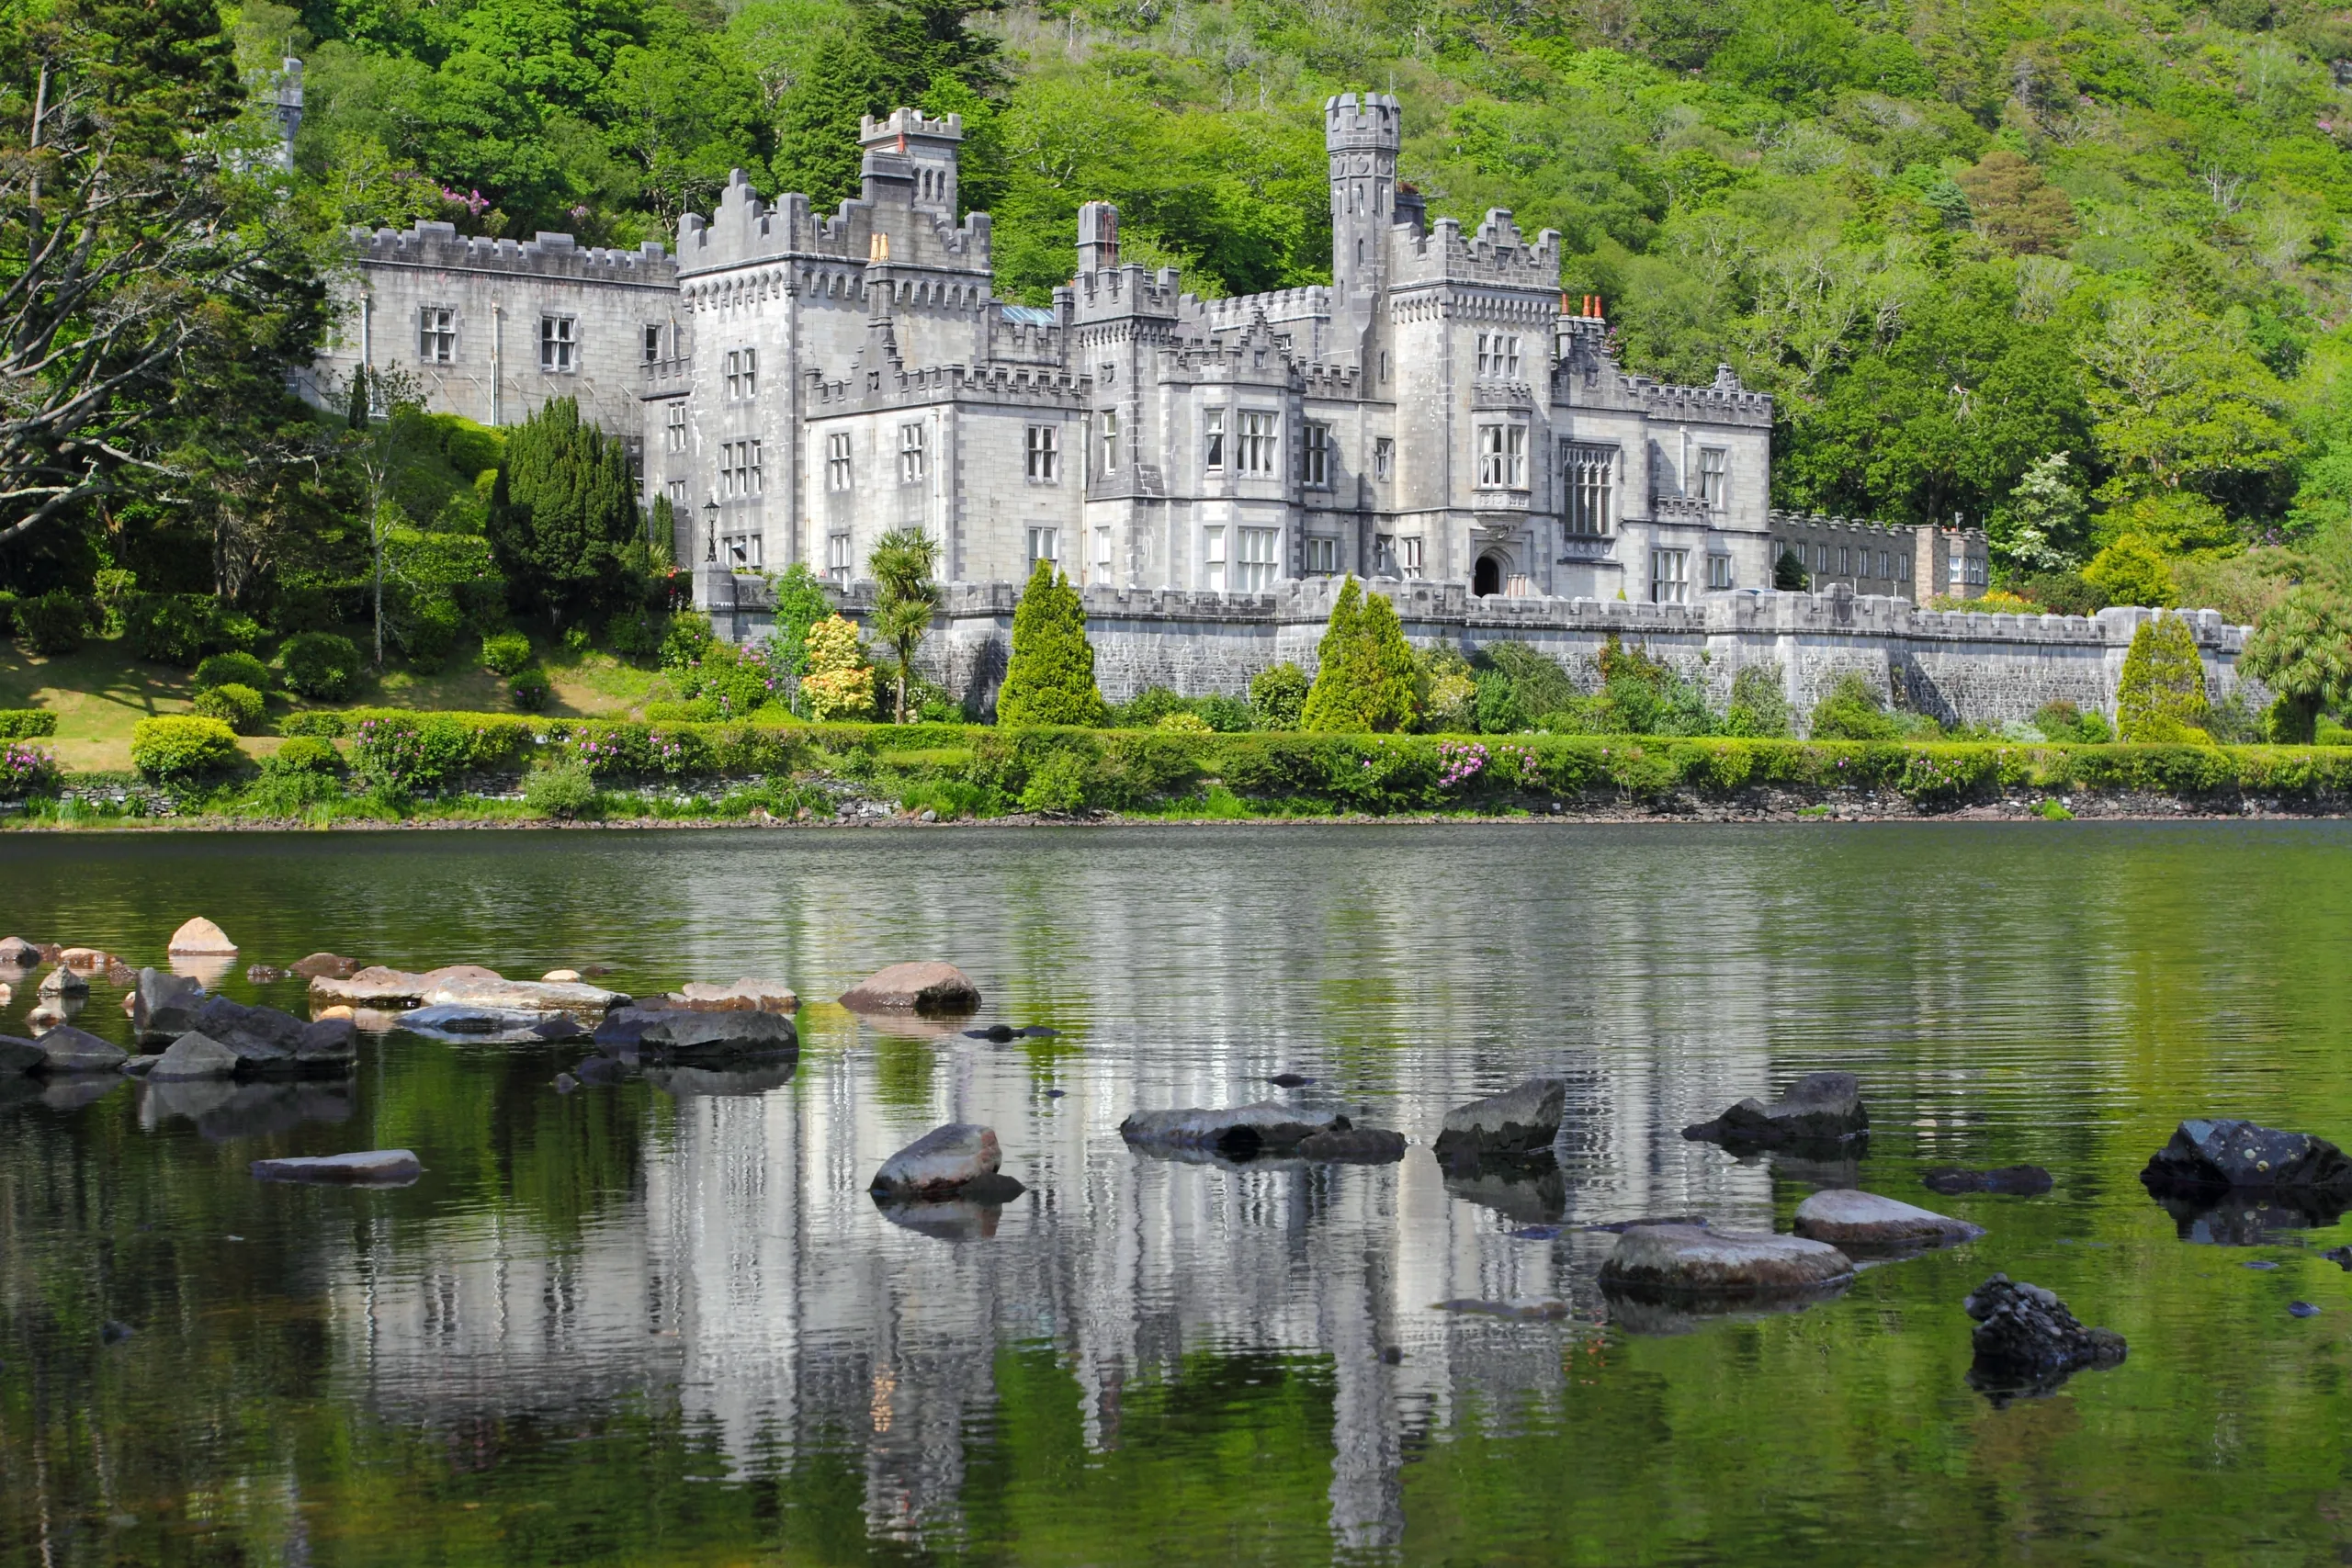 Waterfront view of Kylemore Abbey